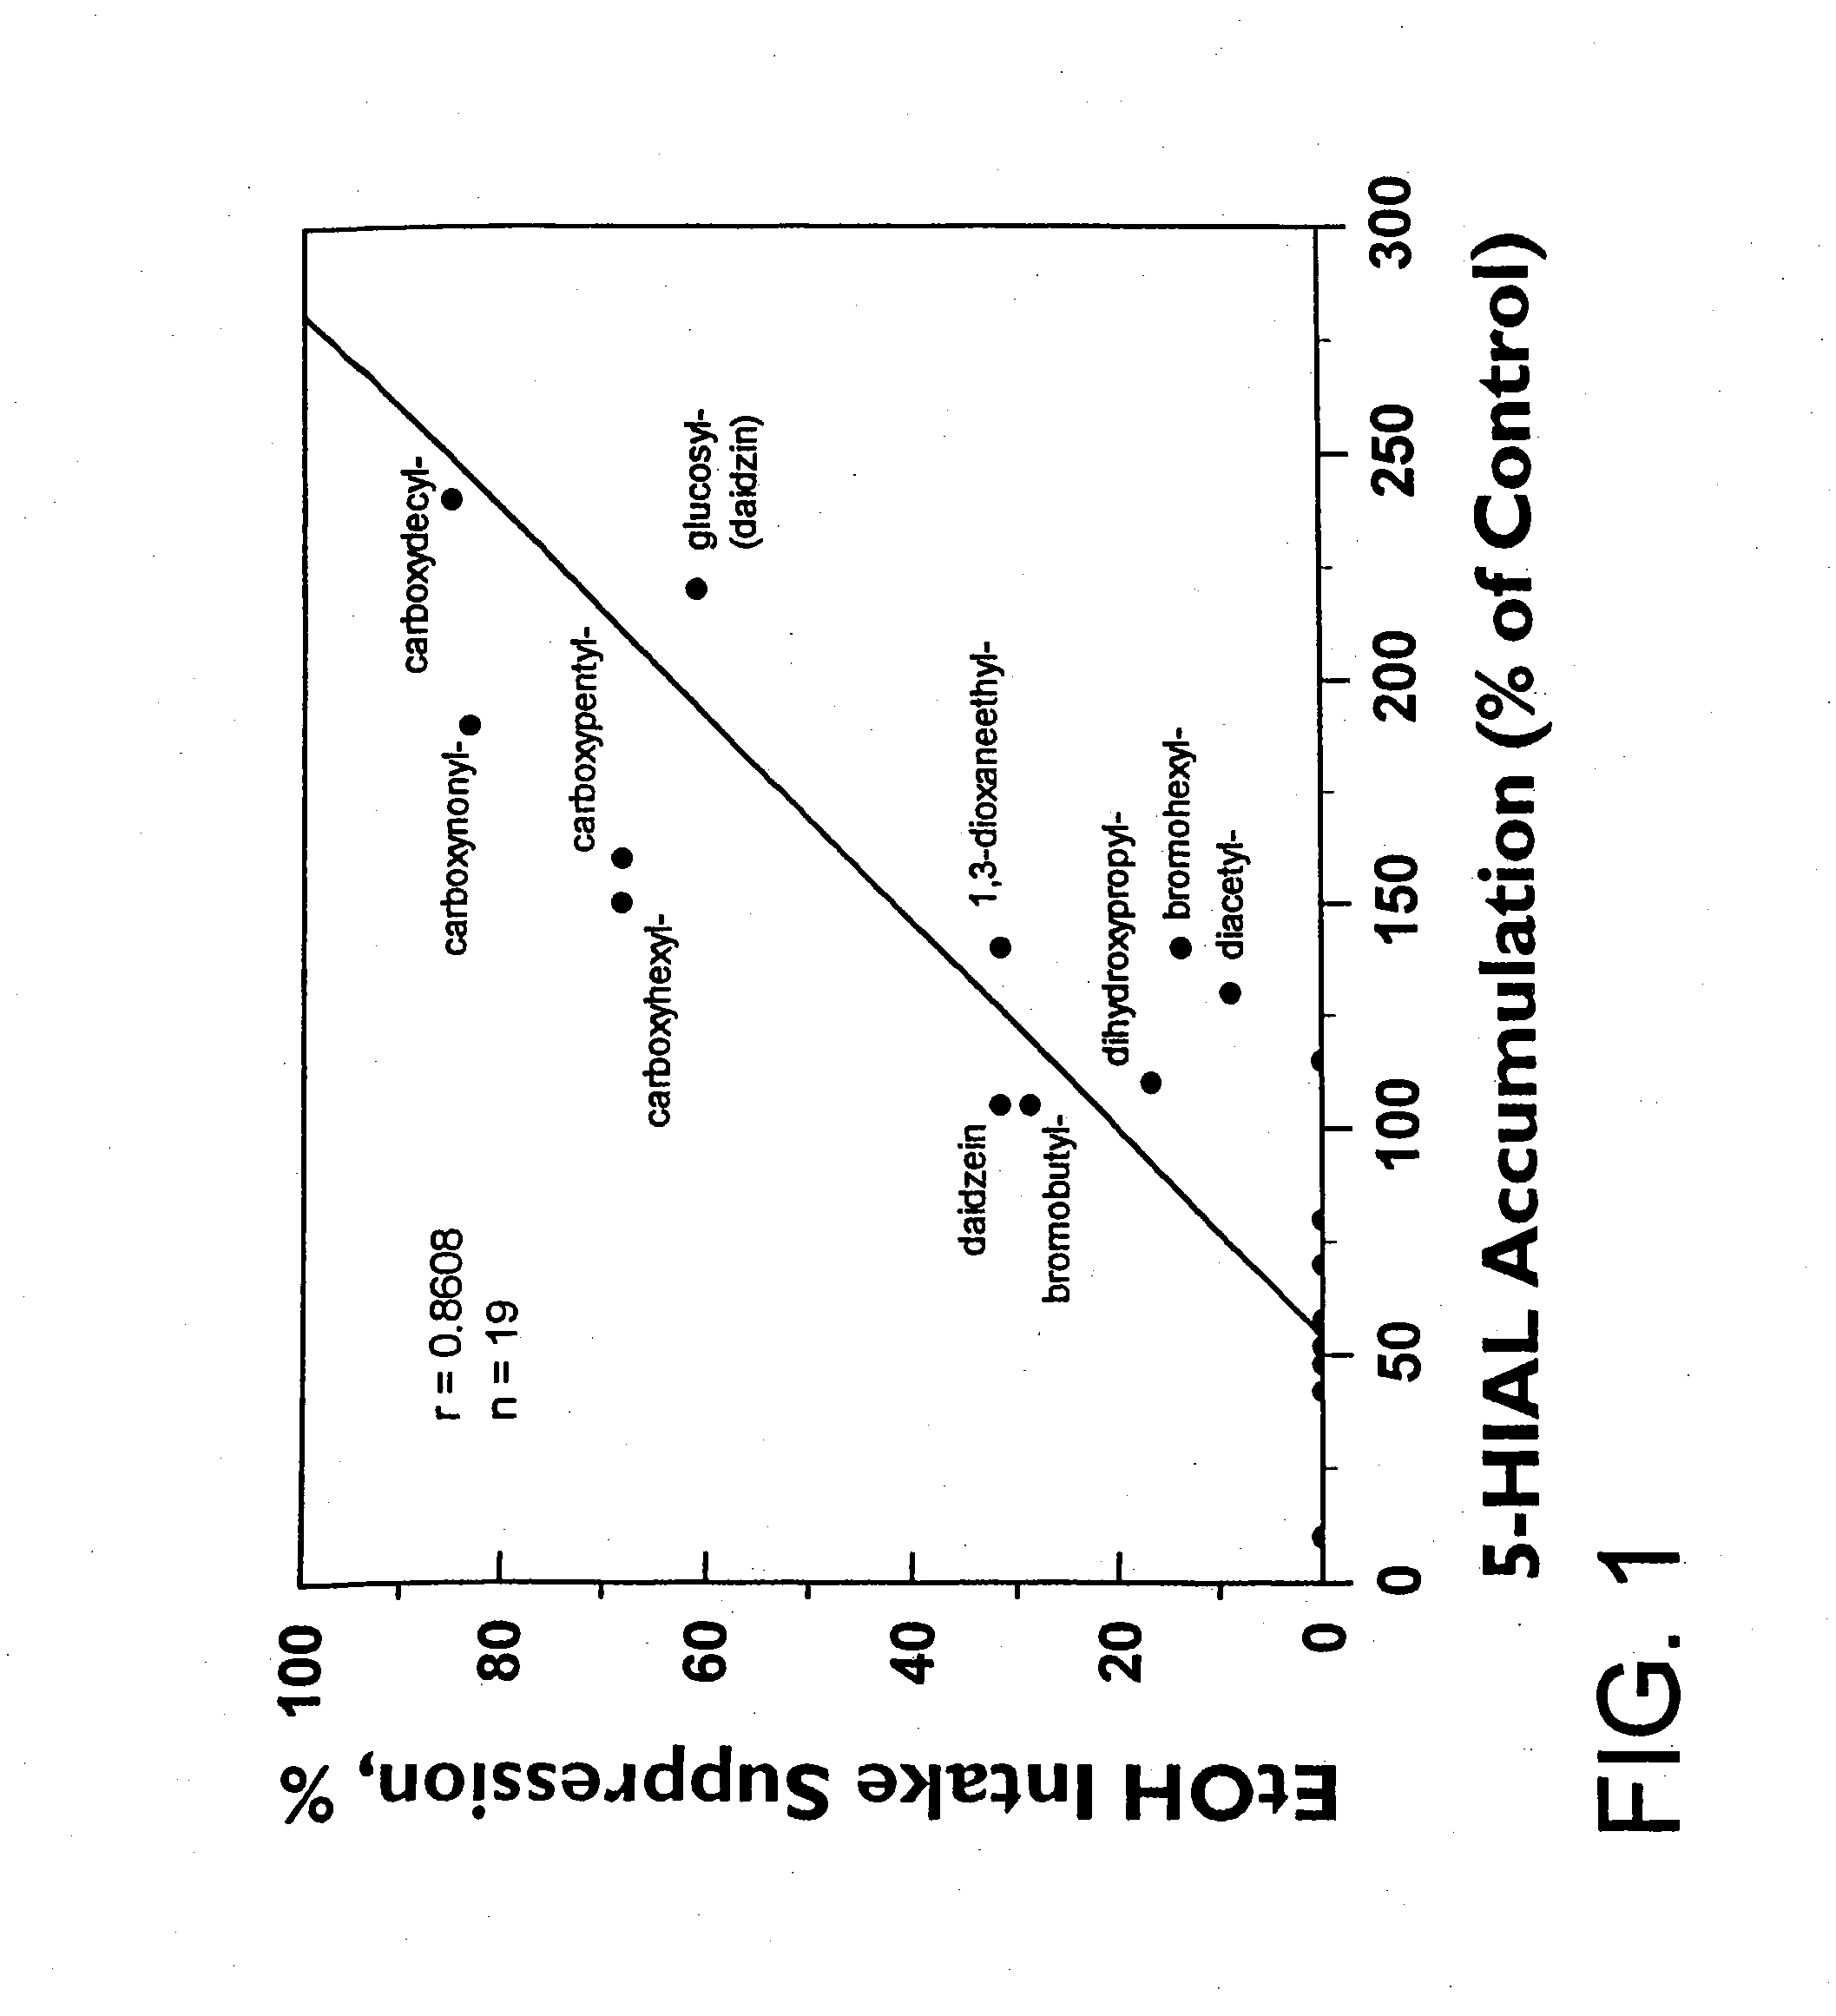 Methods and assays useful in the treatment of alcohol dependence or alcohol abuse